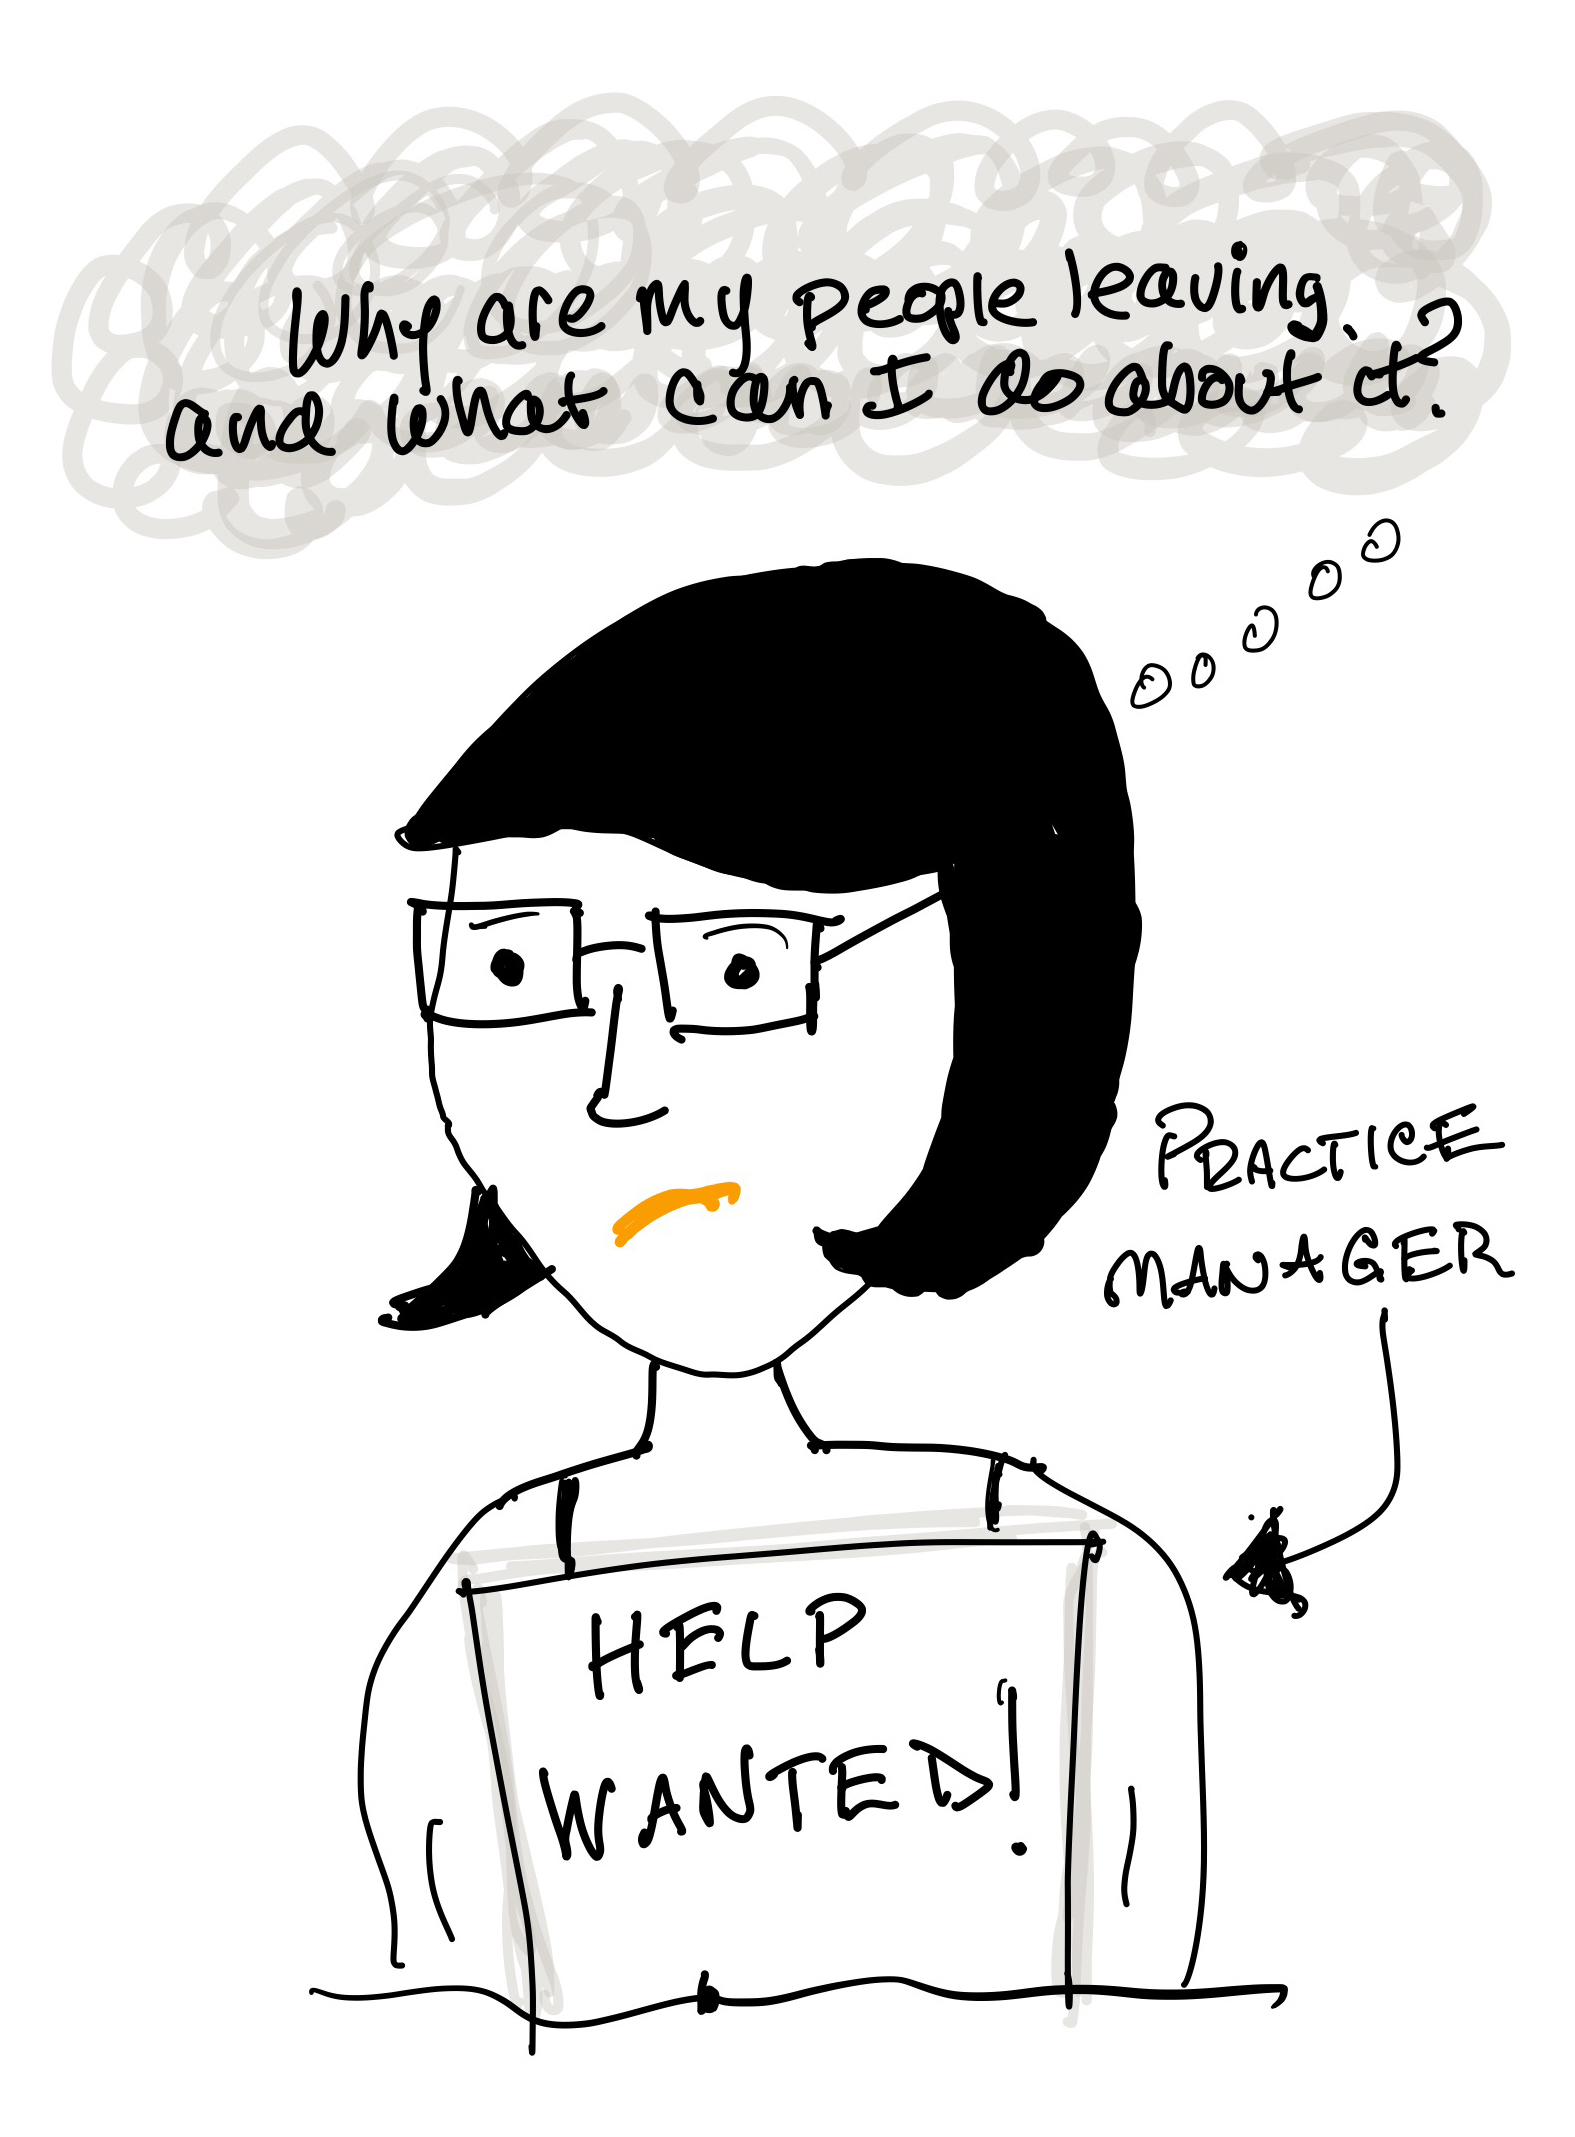 Sabadoodle graphic: why are my people leaving and what can I do about it. Vet Practice Manager